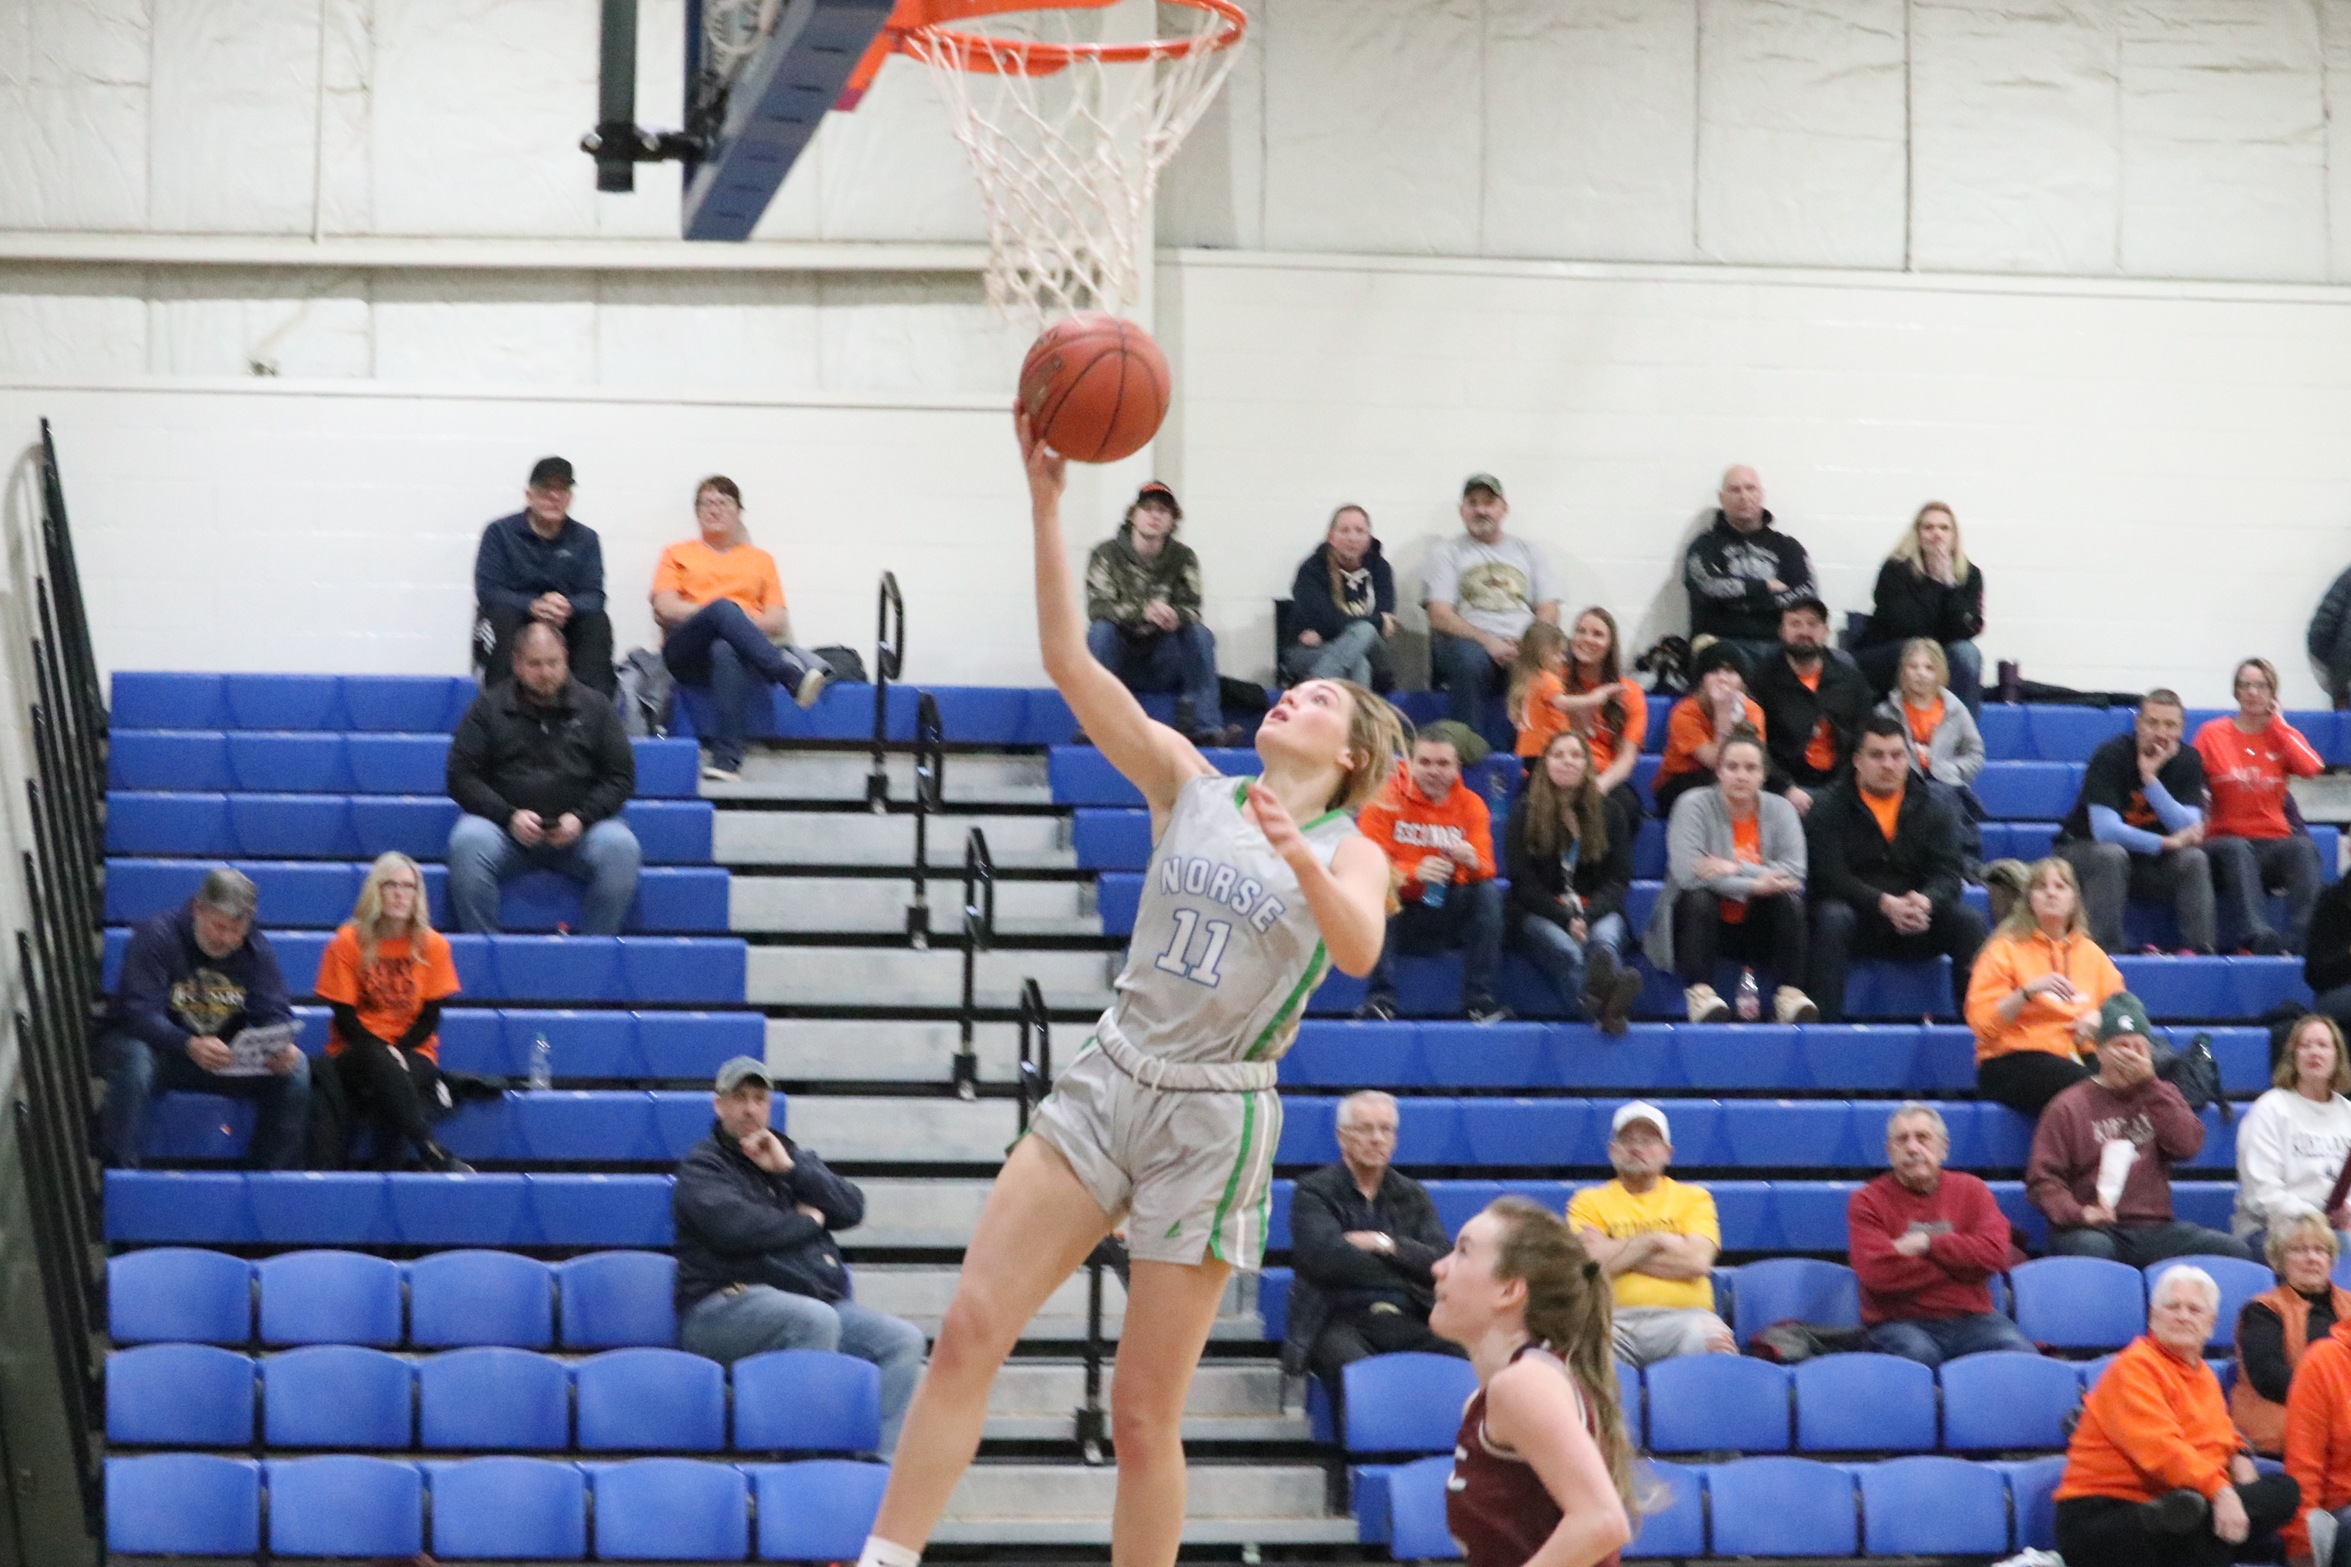 Alyssa Cretton just about to release a layup